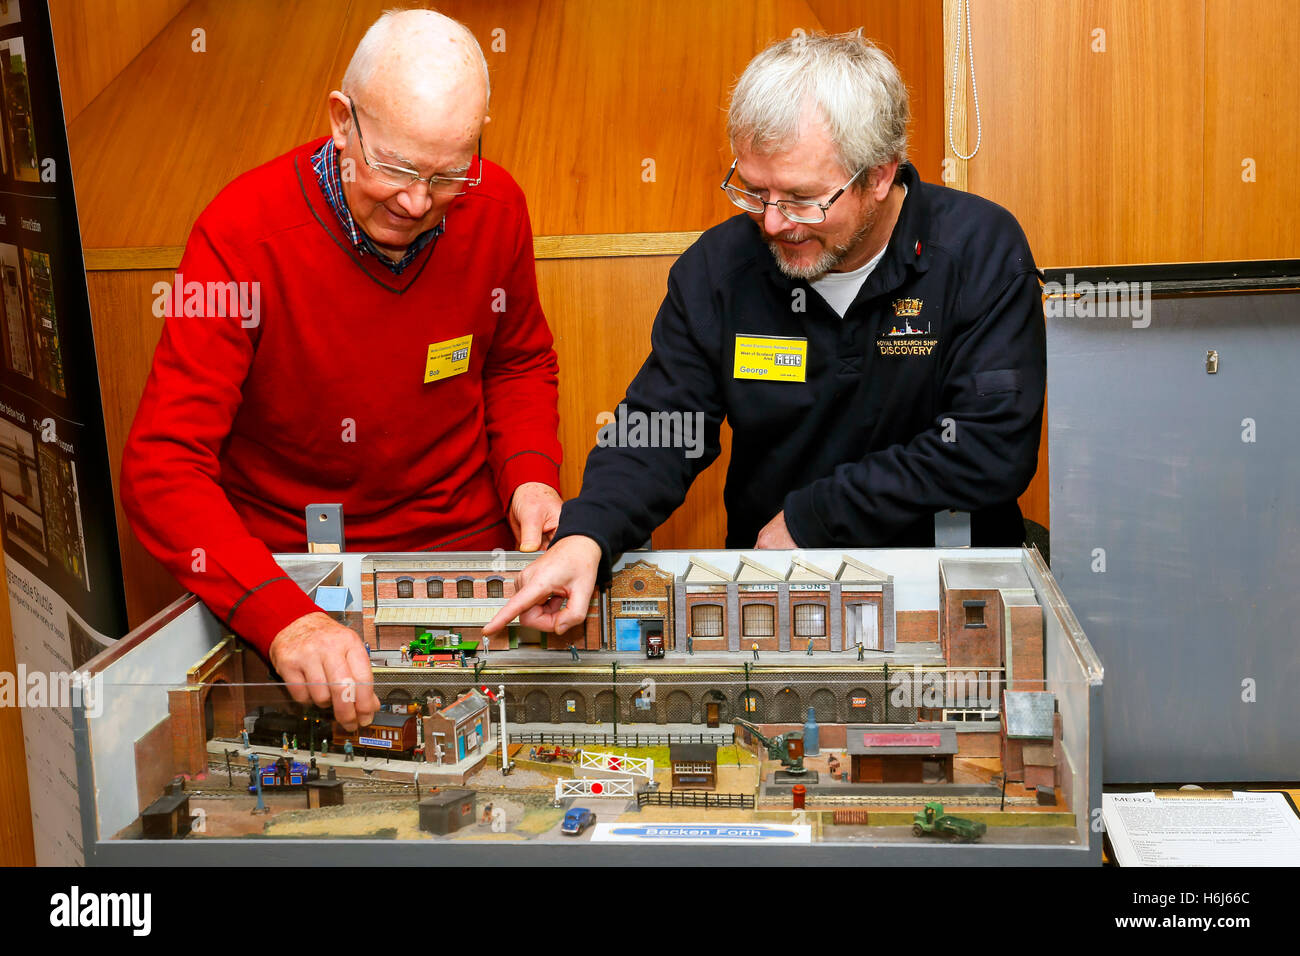 Glasgow, Scotland, UK. 29th October, 2016. On the opening day, of the two day annual Cathcart Model Railway more than a thousand model railway enthusiasts, with ages ranging from 18 months to 100 years old, came to view the railway layouts in various guages and era.GEORGE PARKINSON and BOB YOUNG from the Model Electronic Raiulway Group examines and 'N' guage layout. Credit:  Findlay/Alamy Live News Stock Photo